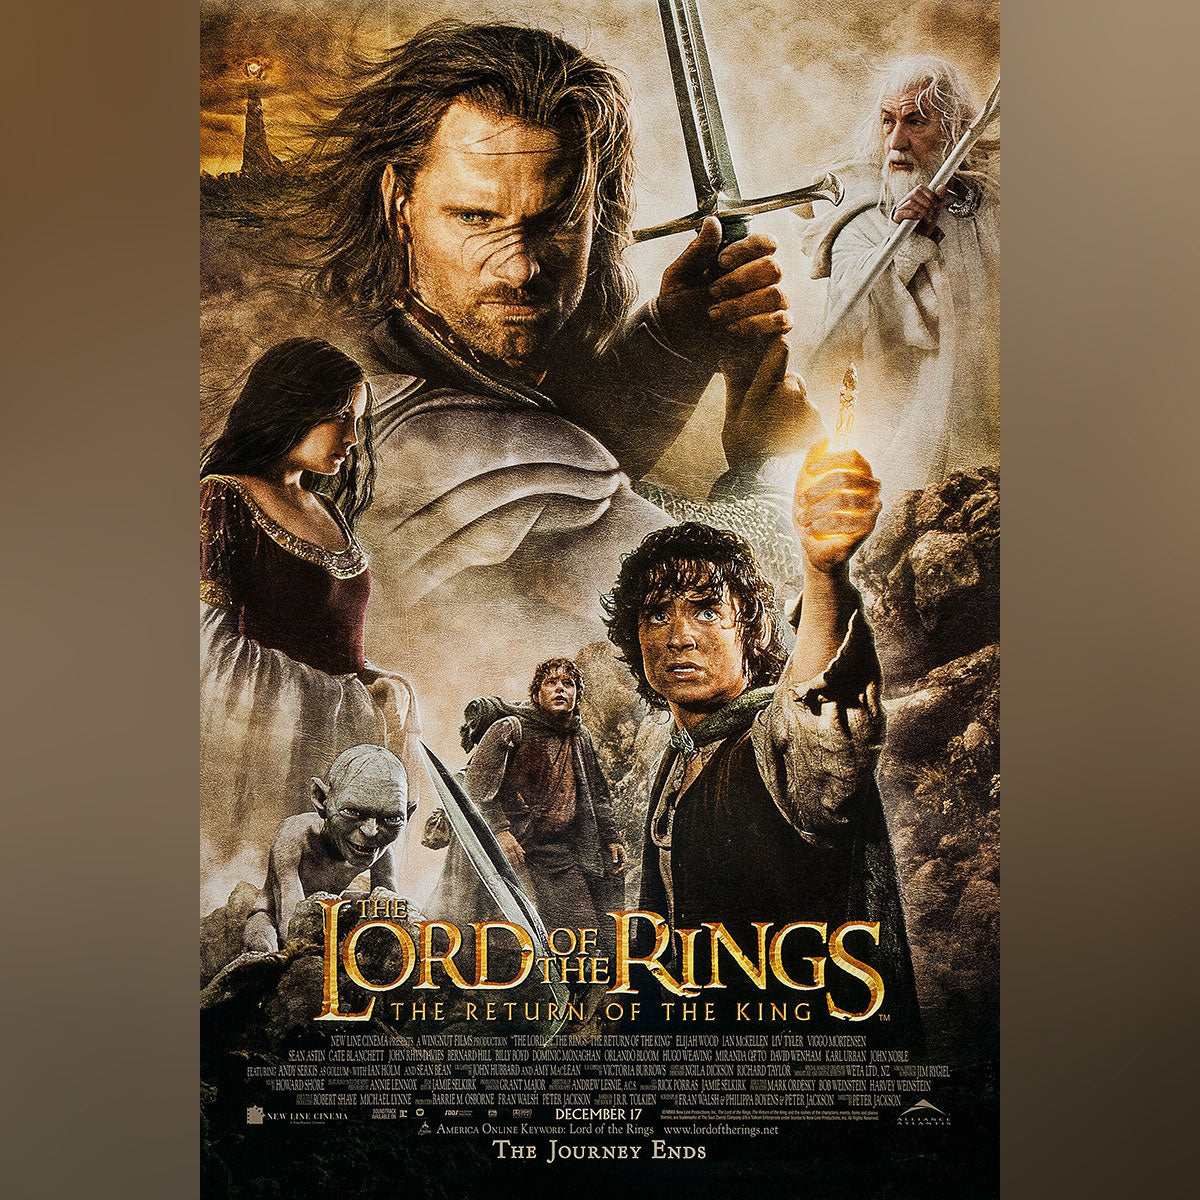 Original Movie Poster of Lord Of The Rings: The Return Of The King (2003)